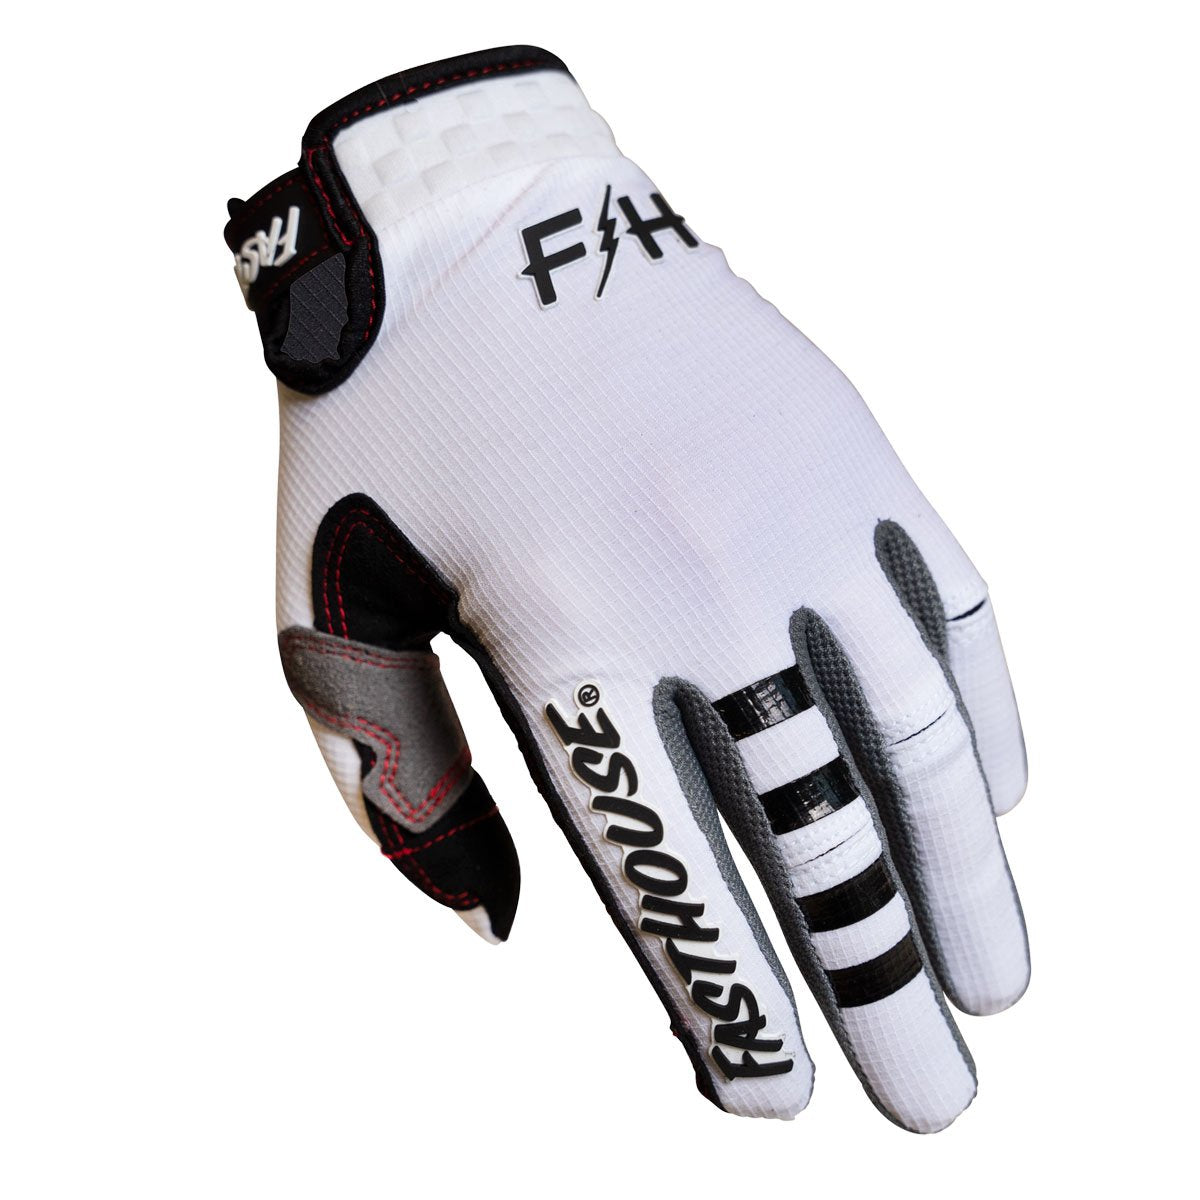 Fasthouse Elrod Air Gloves